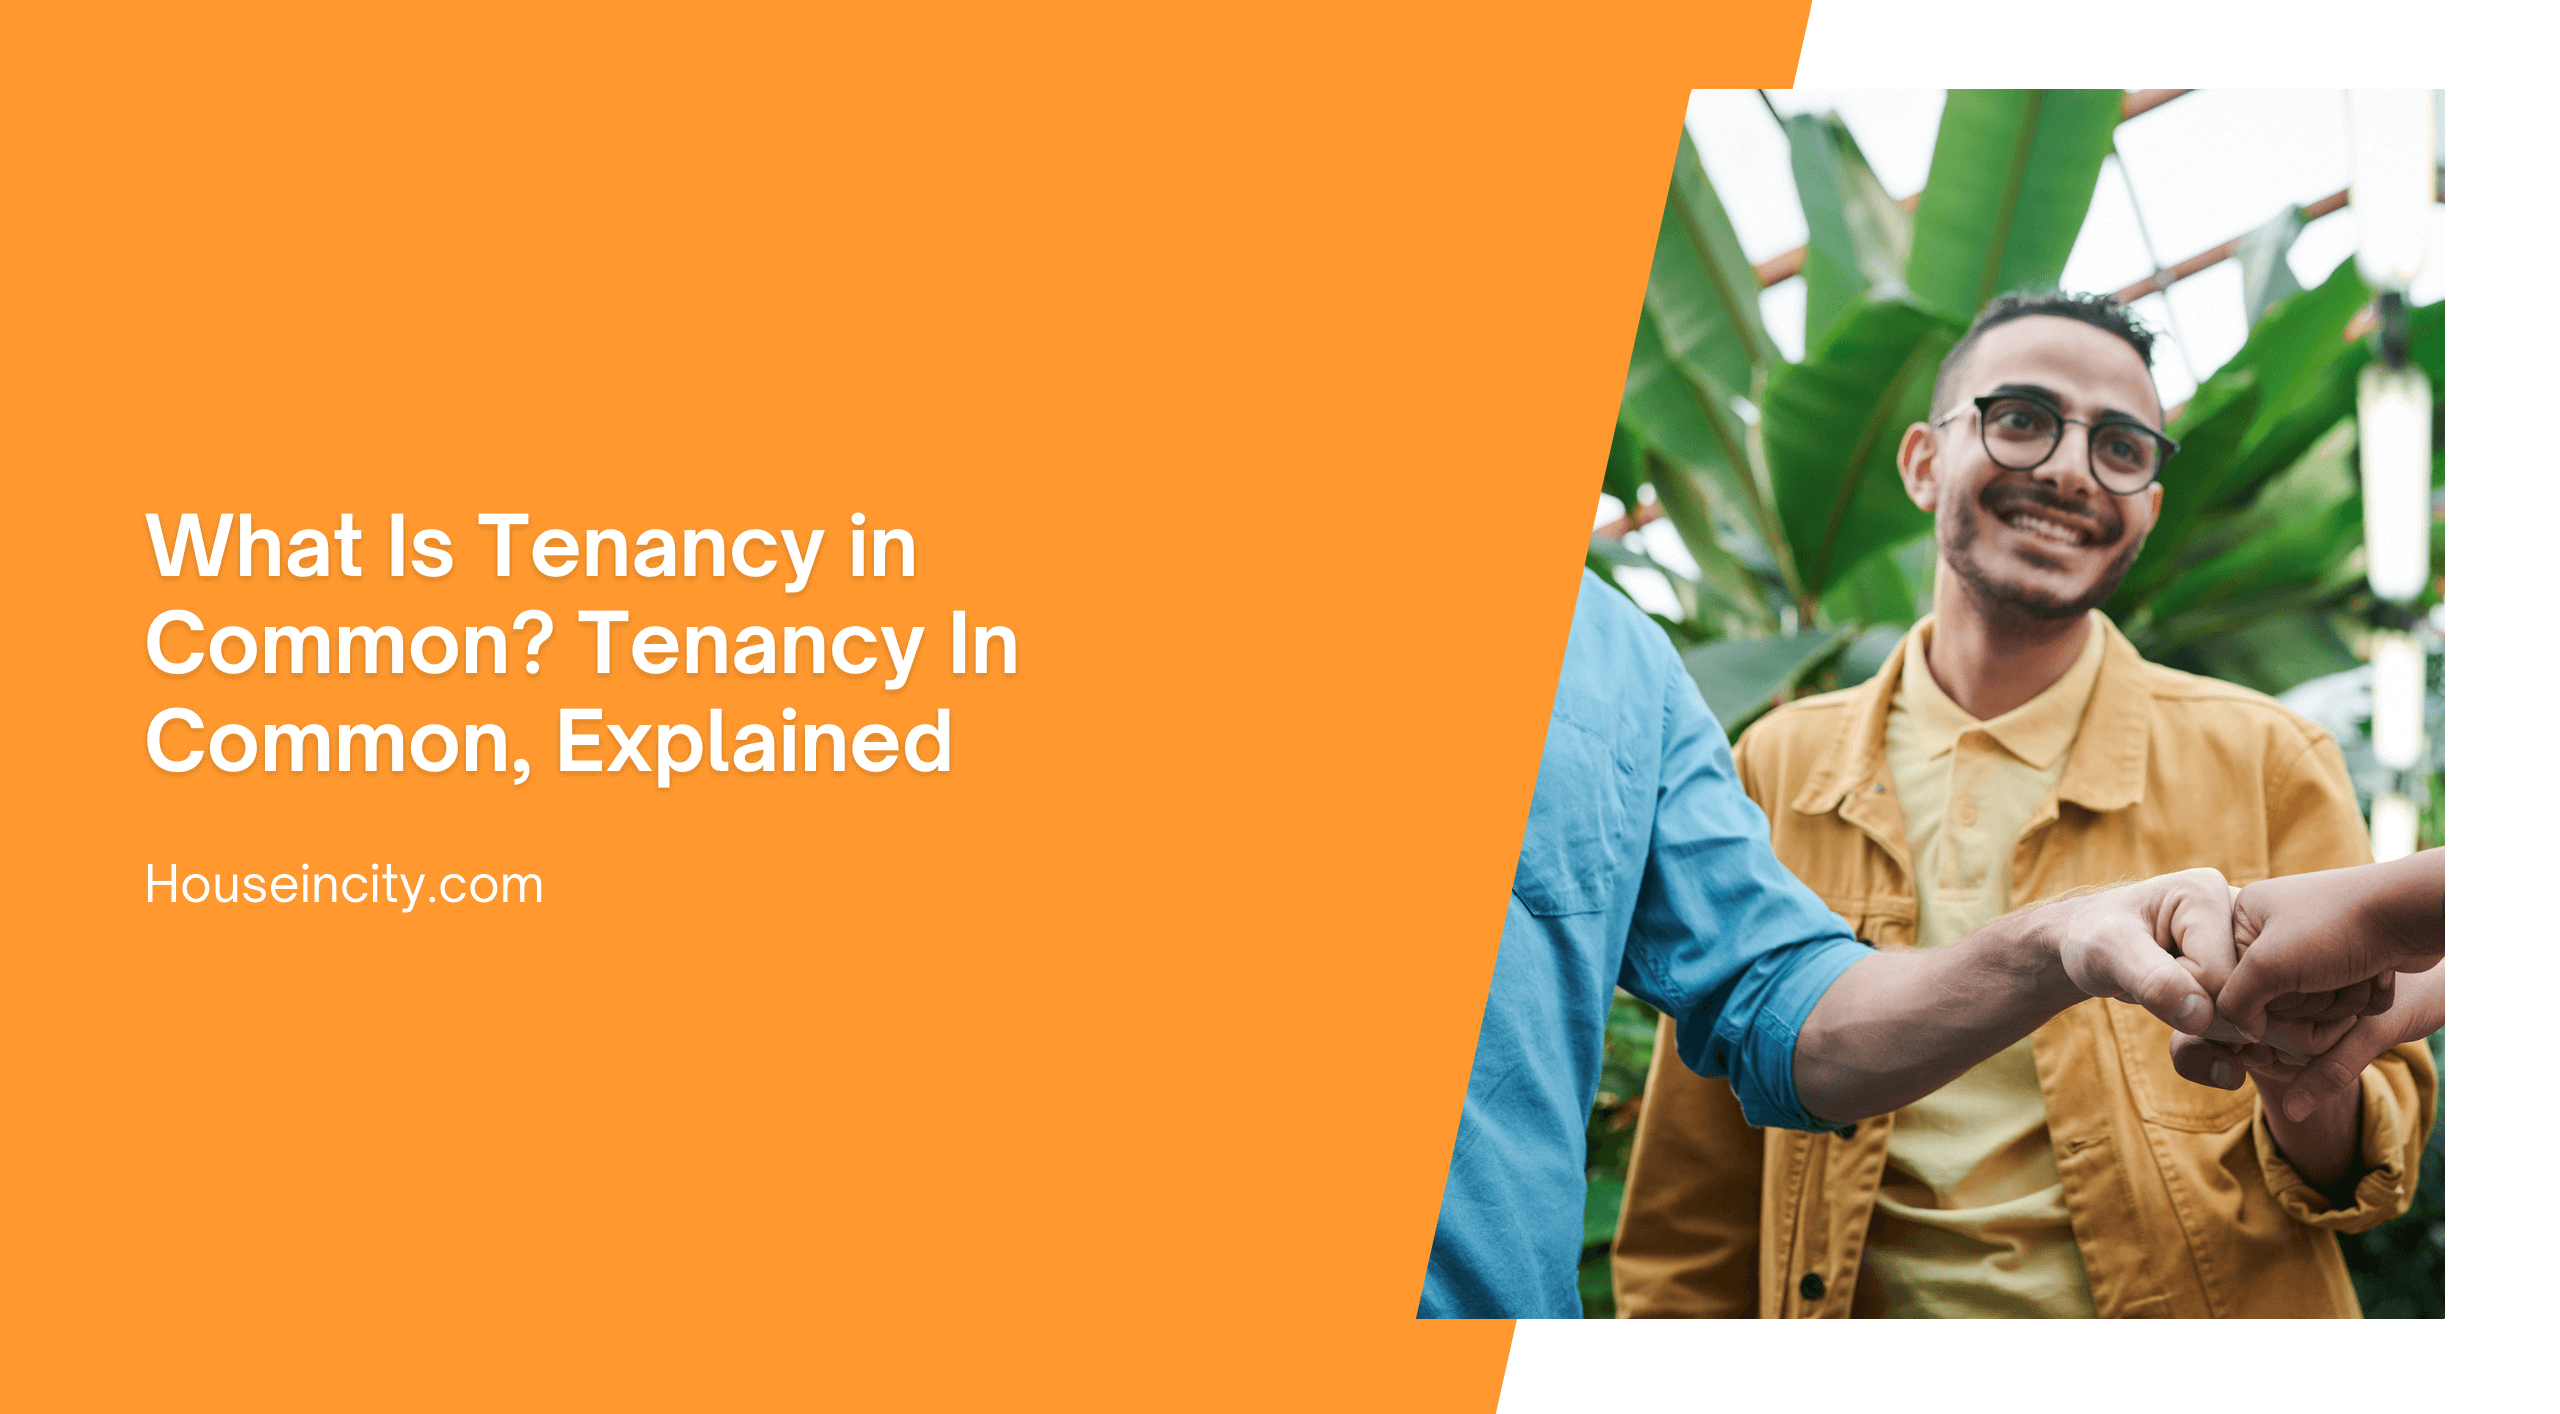 What Is Tenancy in Common? Tenancy In Common, Explained